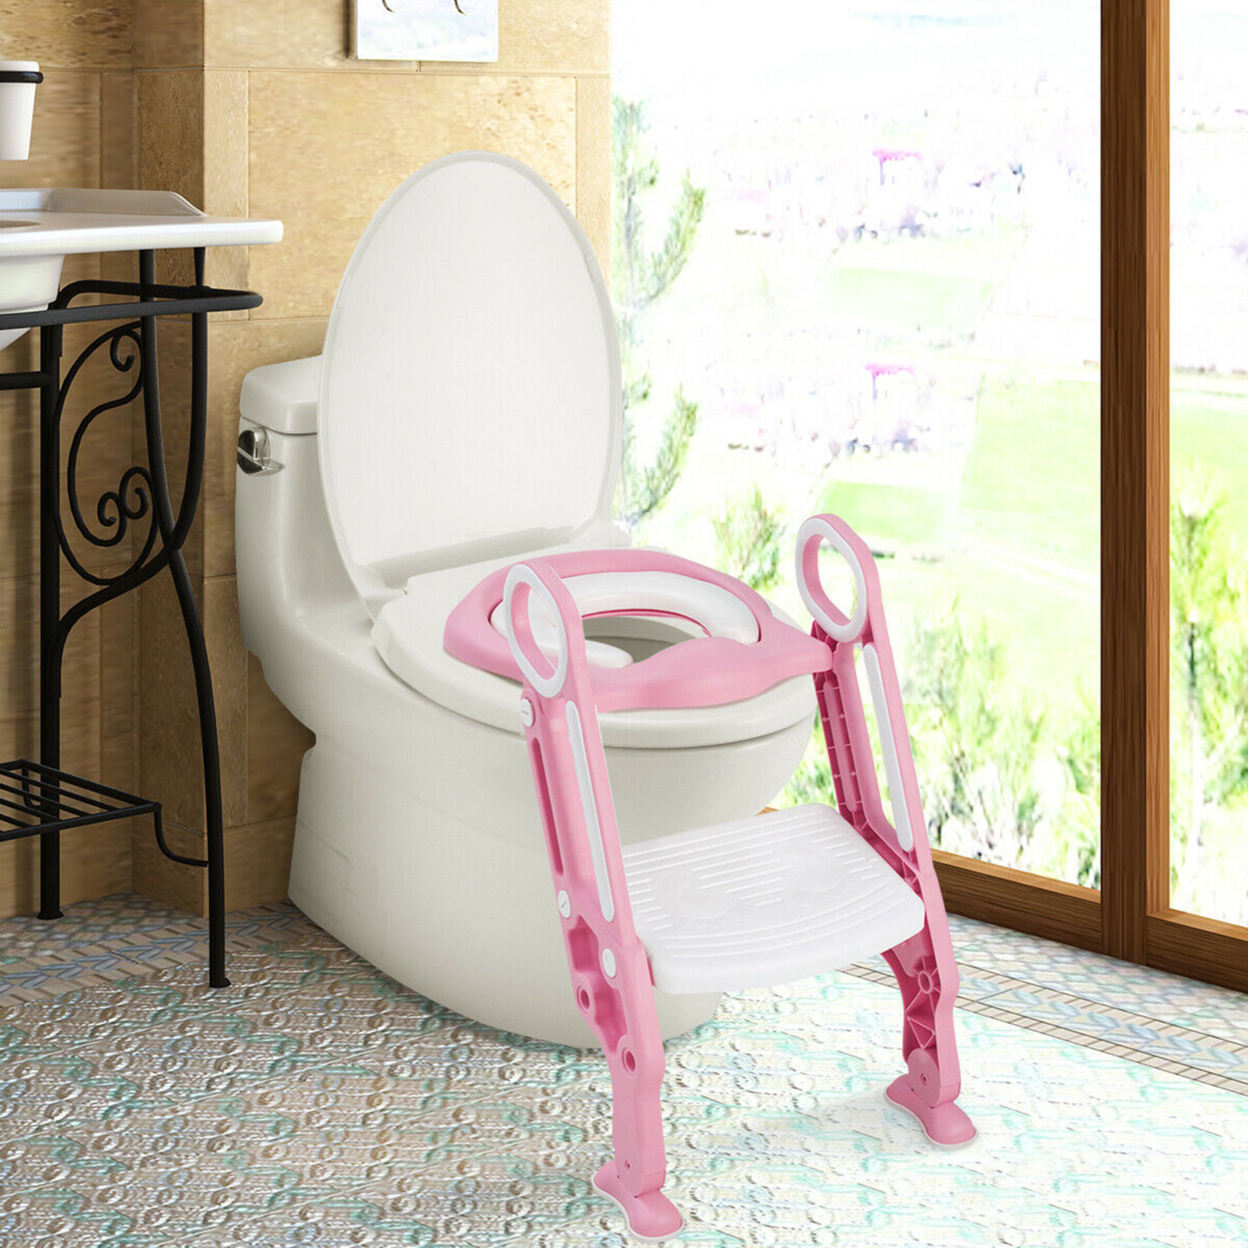 Foldable Potty Training Toilet Seat W/ Step Ladder Adjustable Baby Kids Home